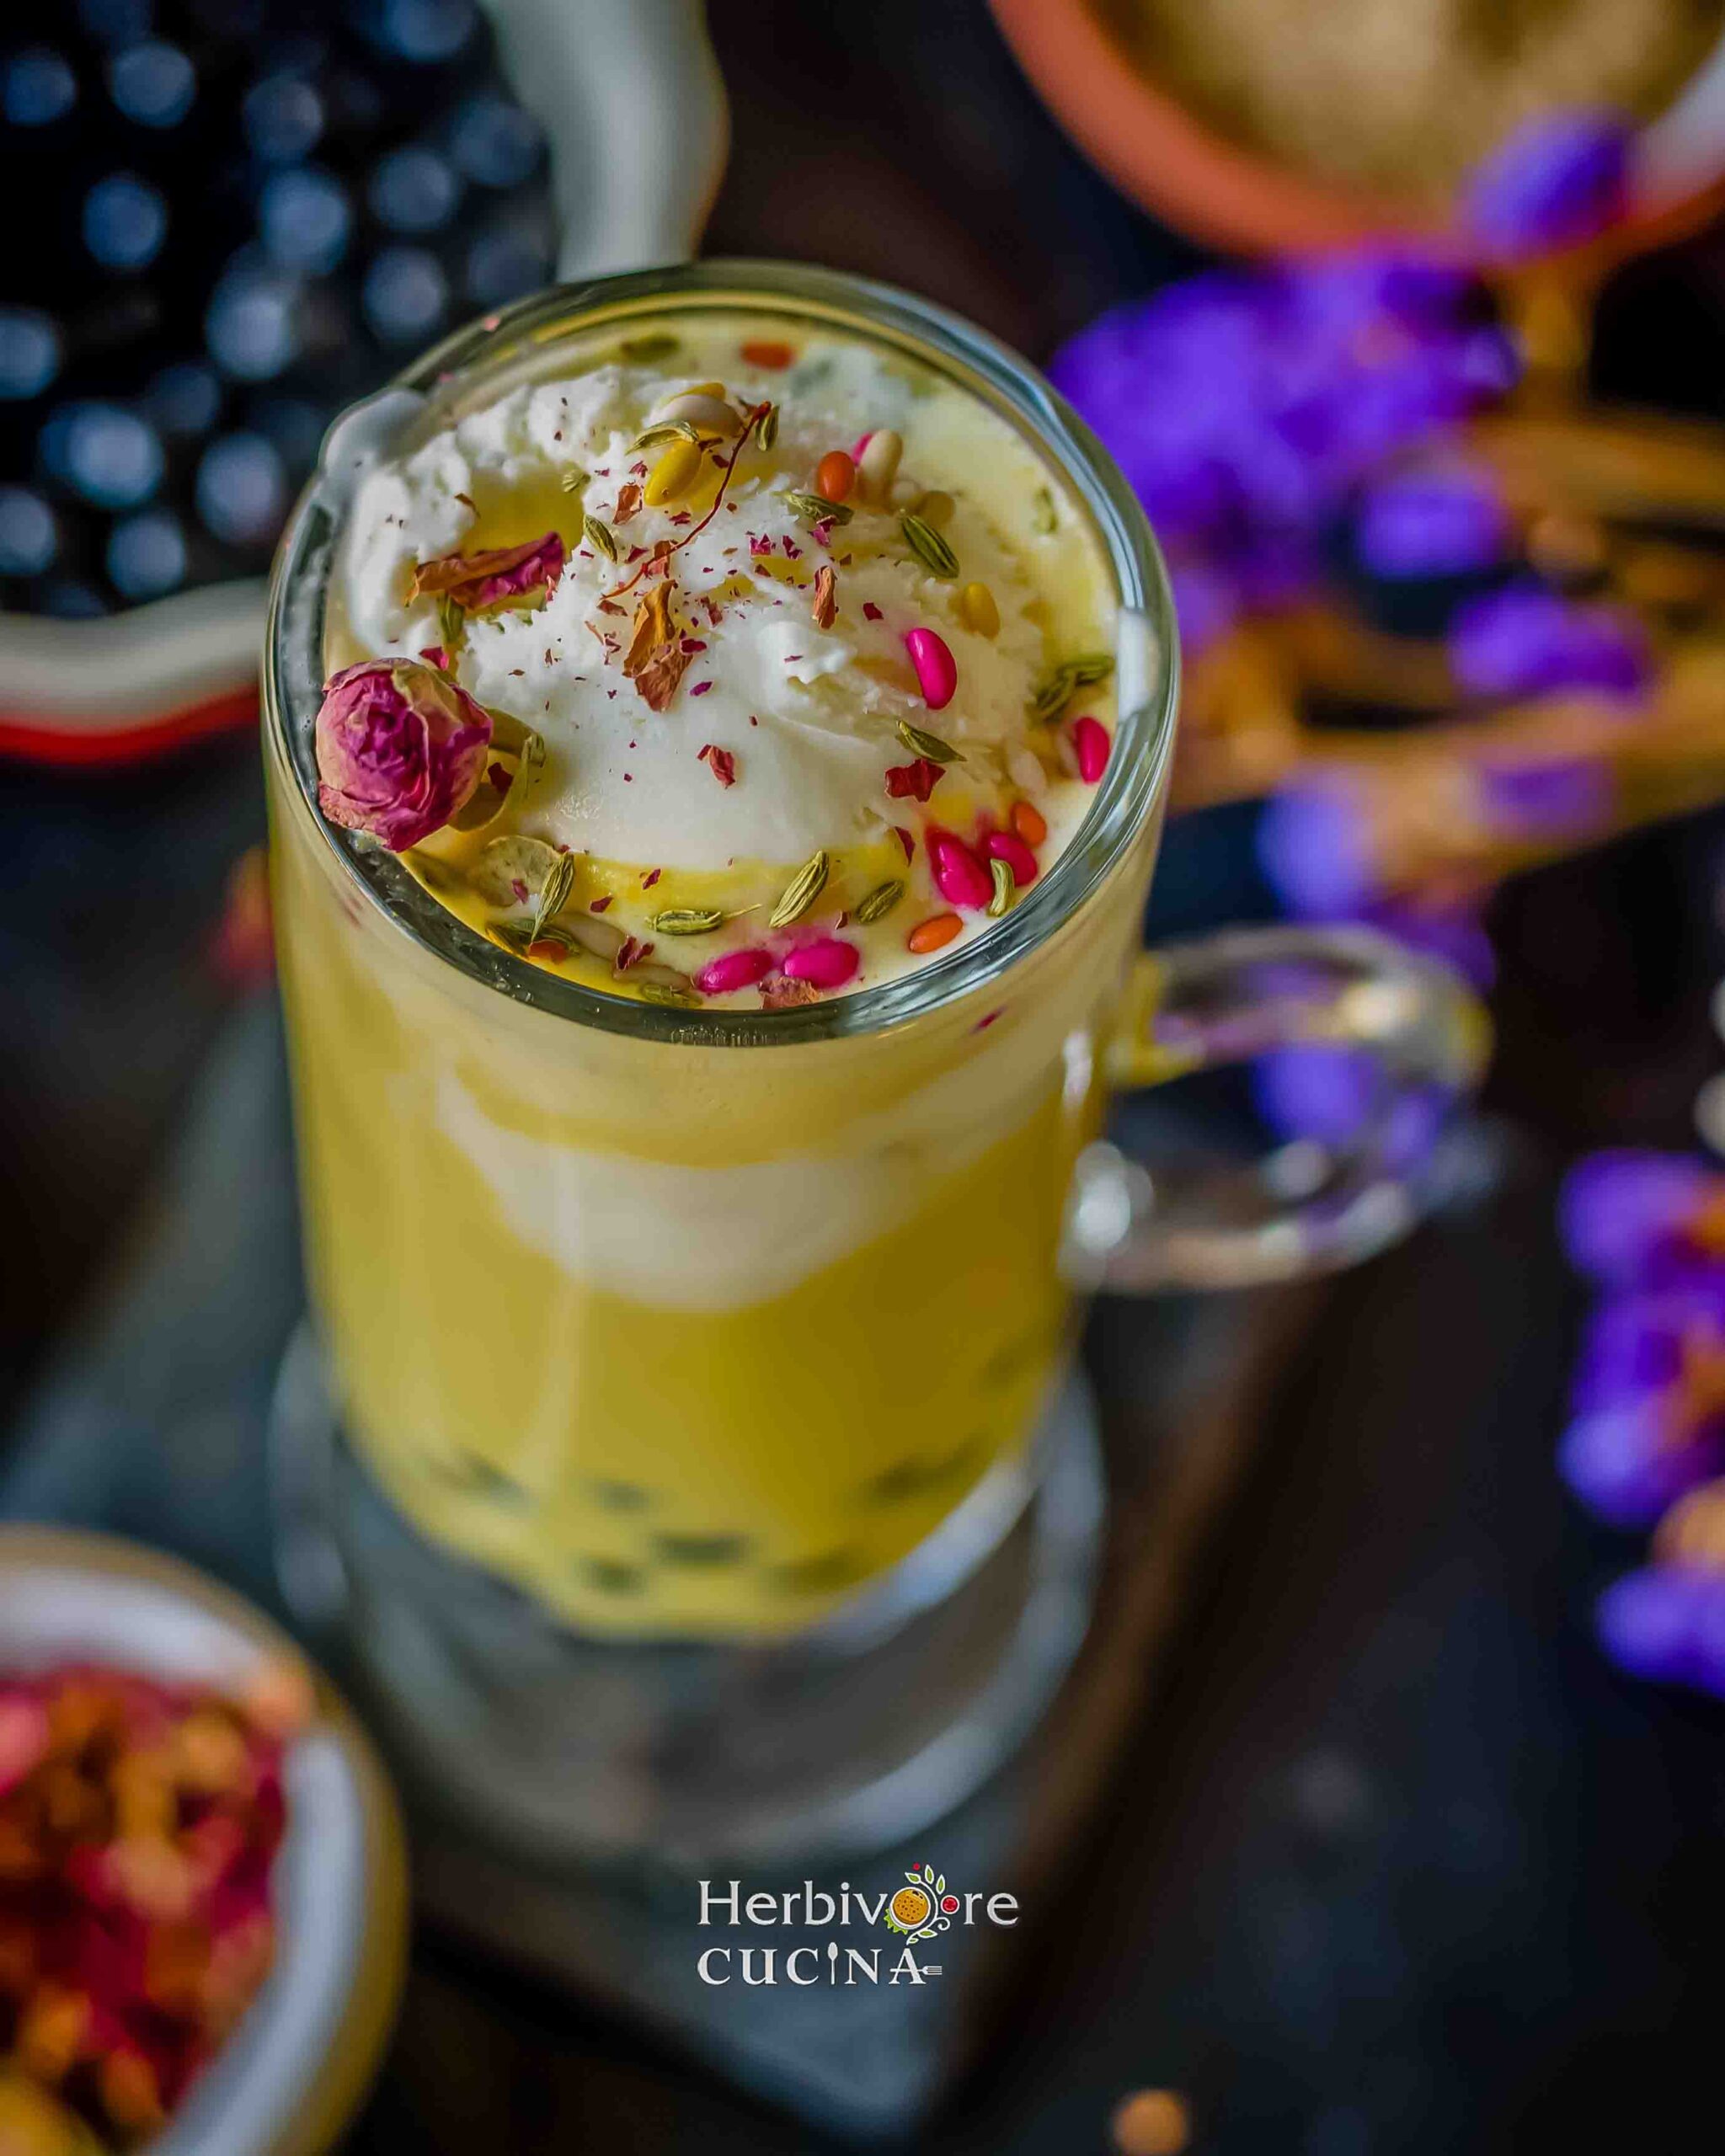 Top view of boba thandai with all the toppings like colored fennel and dried rose petals against a backdrop of dried flowers and boba.